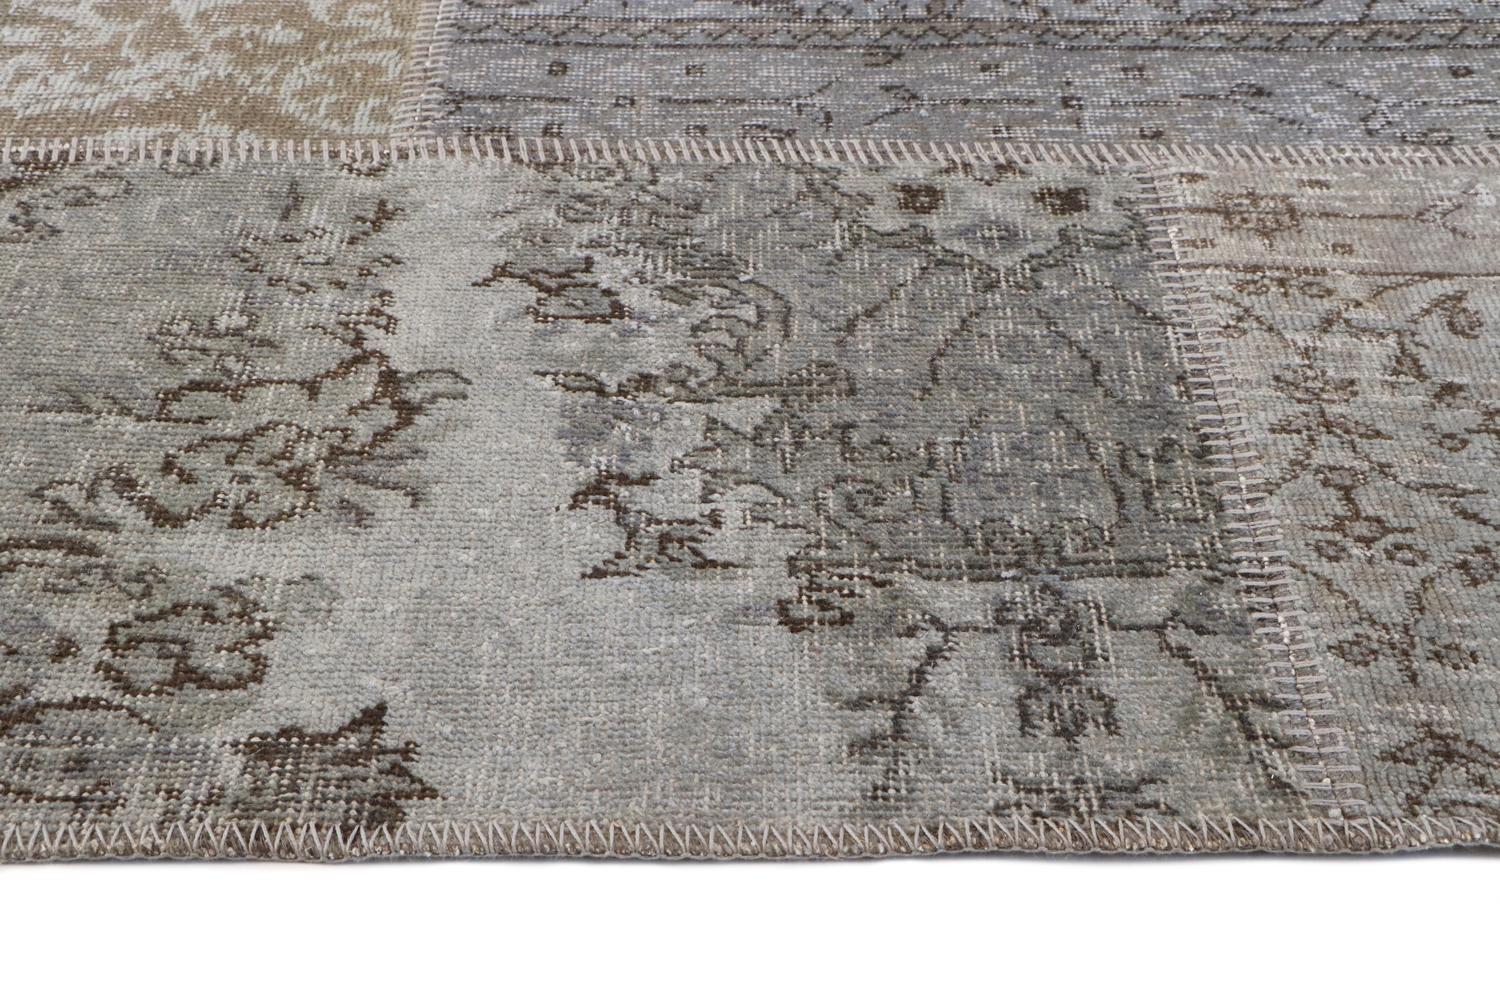 Turkish 21st Century Vintage Wool Cotton Silvery Thin Rug by Deanna Comellini 300x400 cm For Sale